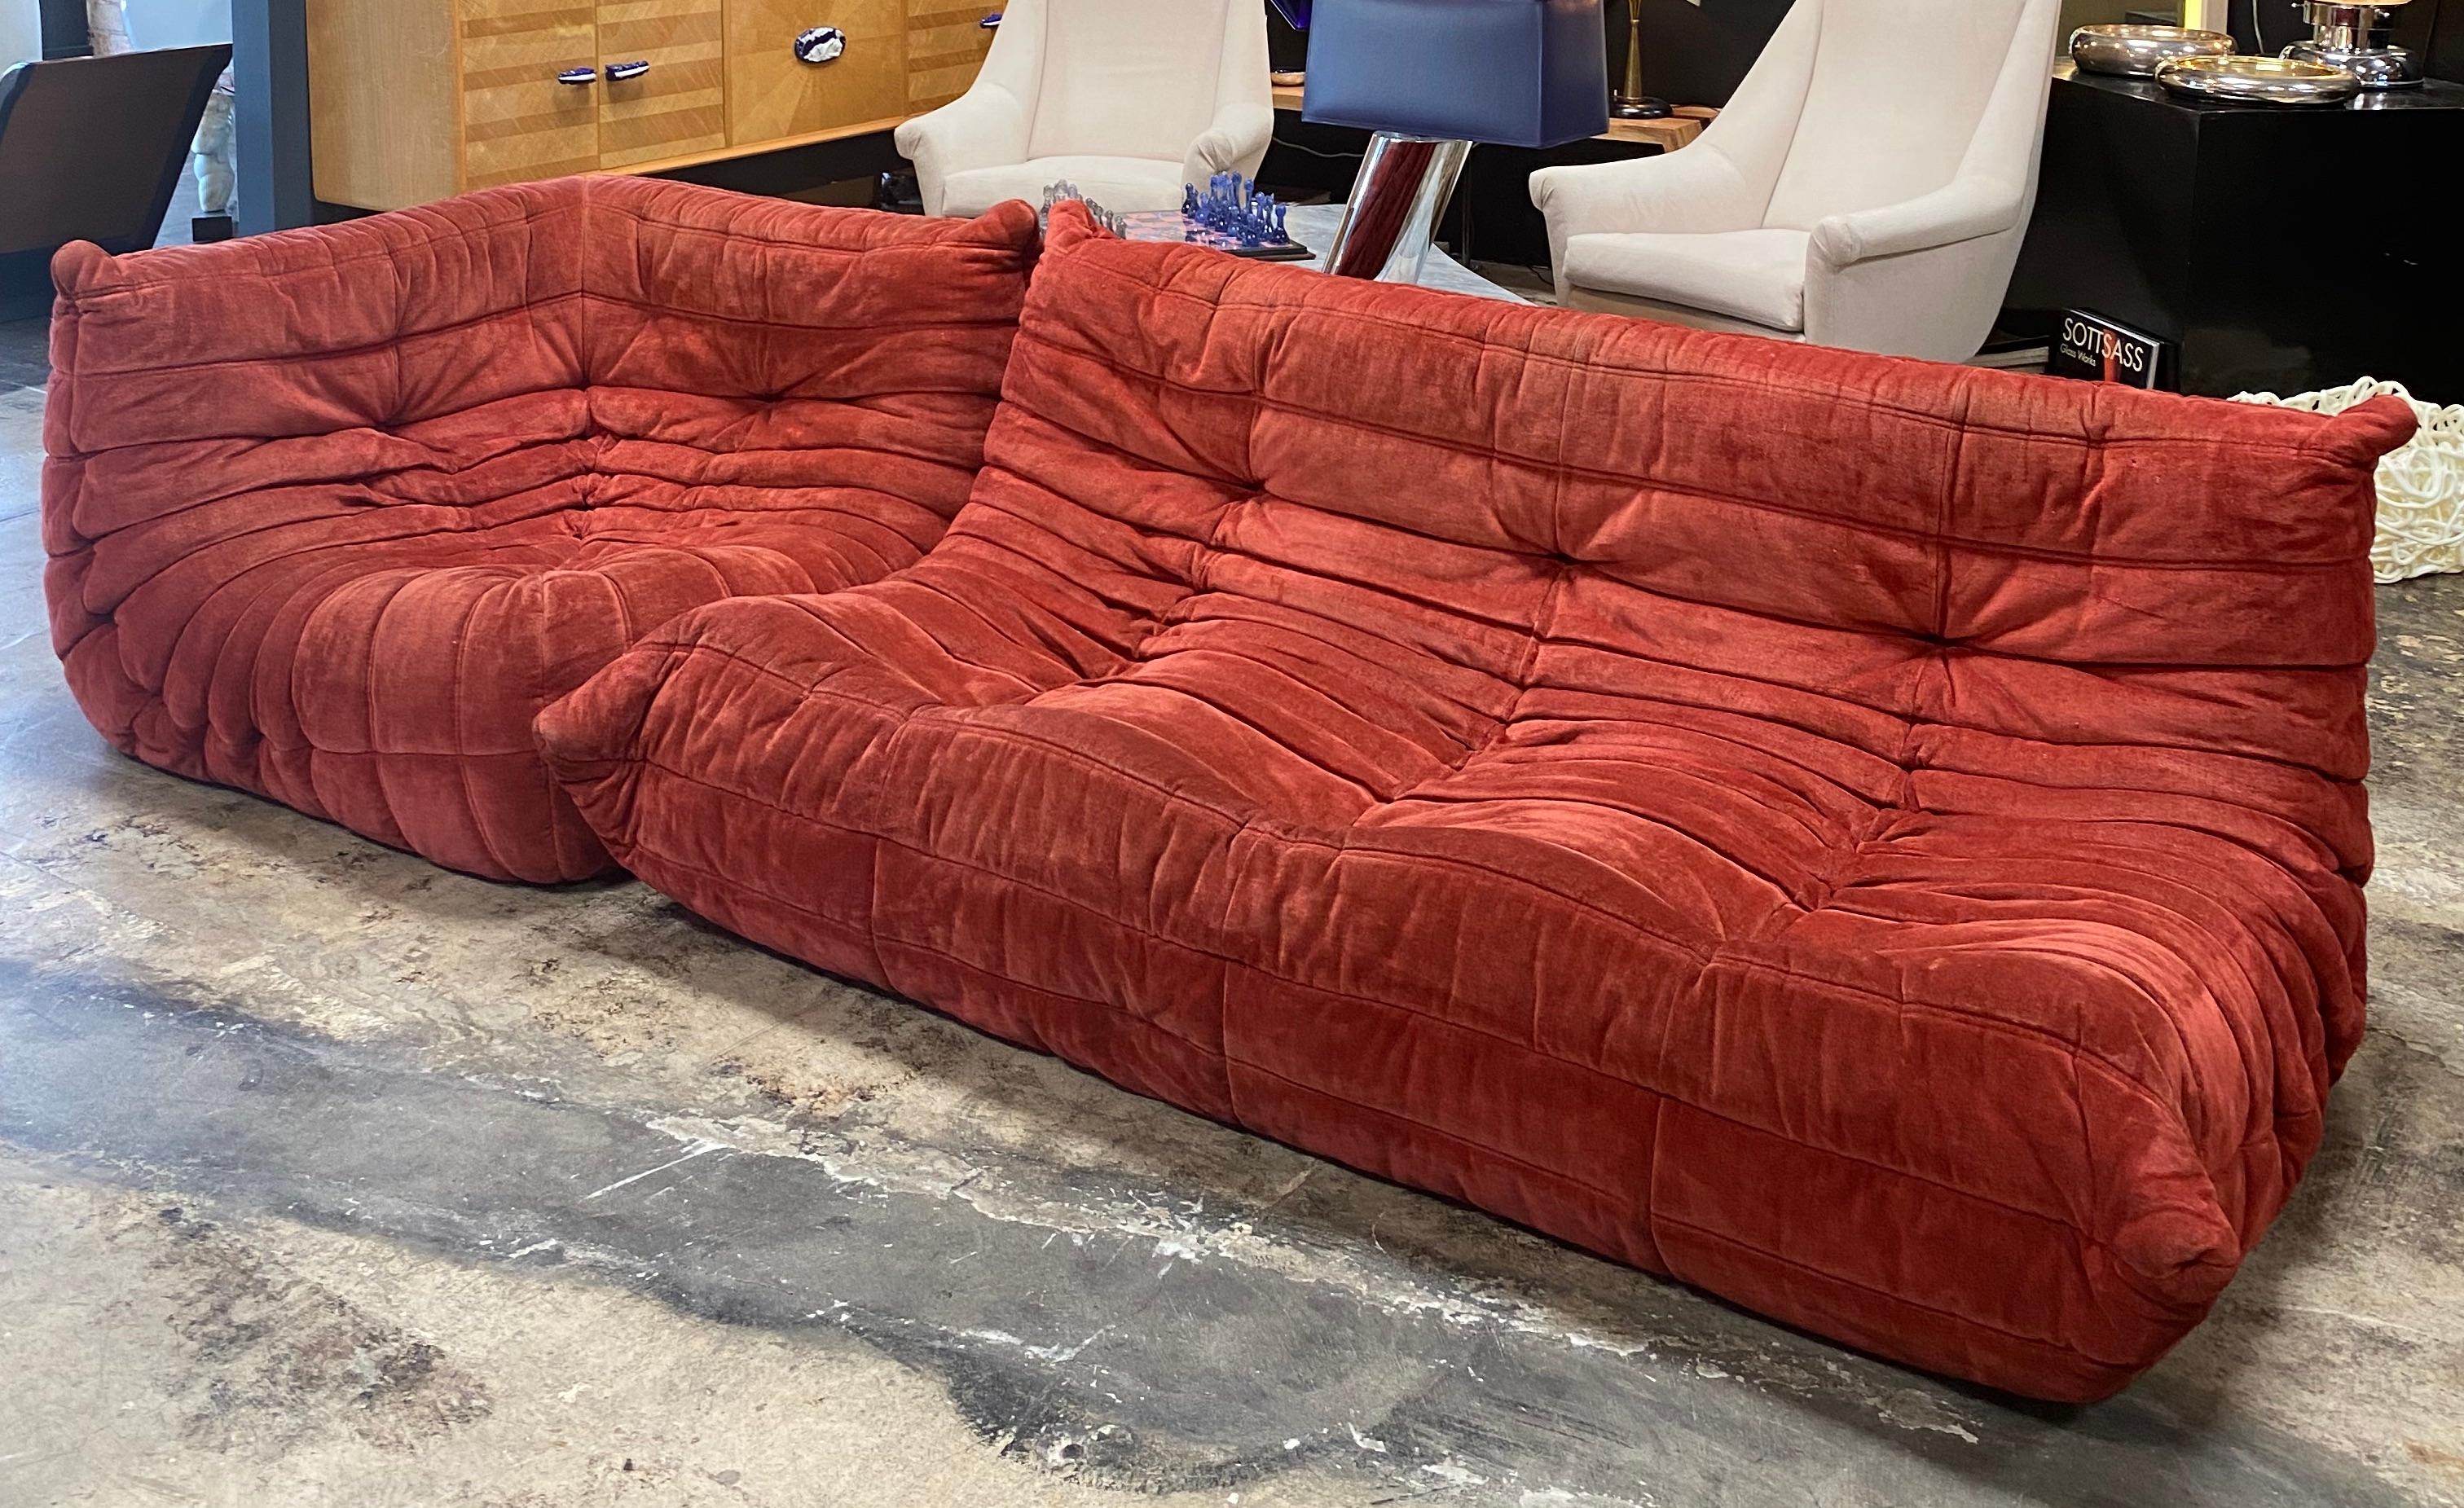 The iconic Togo sofa, originally designed by Michel Ducaroy for Ligne Roset in 1973 has become a design Classic.
This three-piece modular set is incredibly versatile and can be configured into one large corner sofa or split for a multitude of